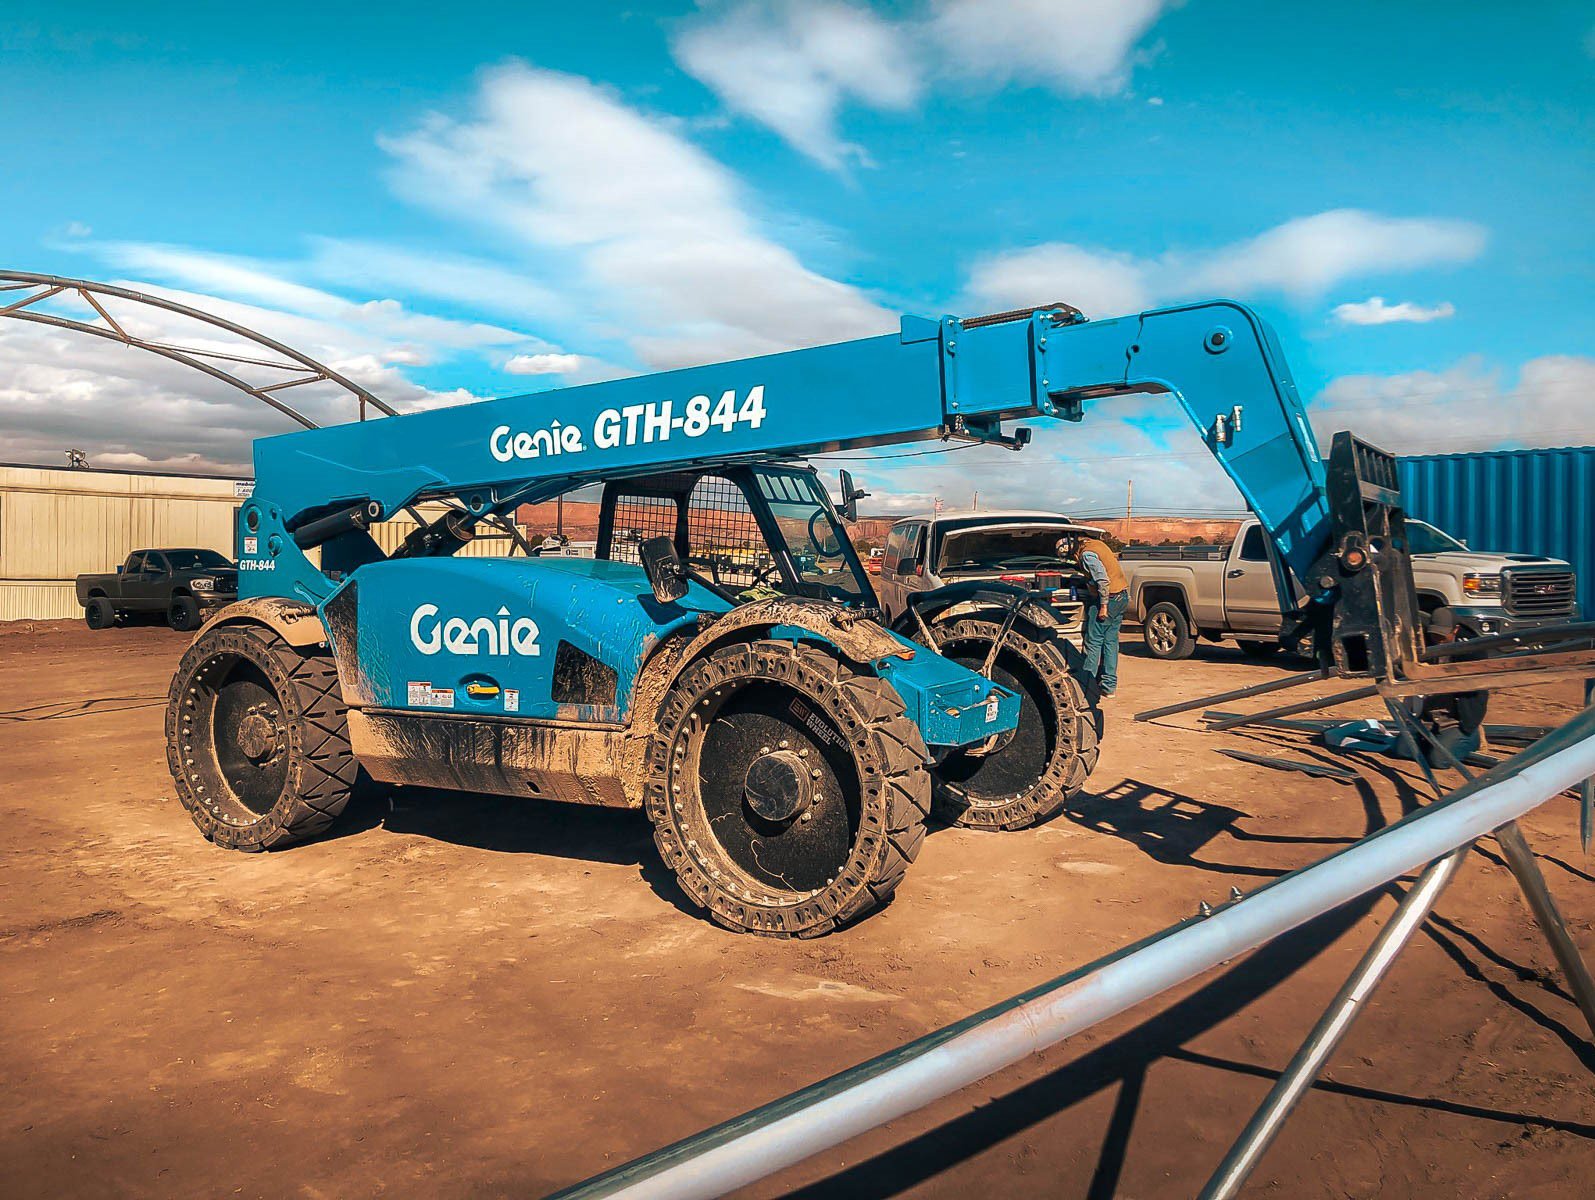 This picture shows our telescopic forklift tires on a blue Genie telehandler